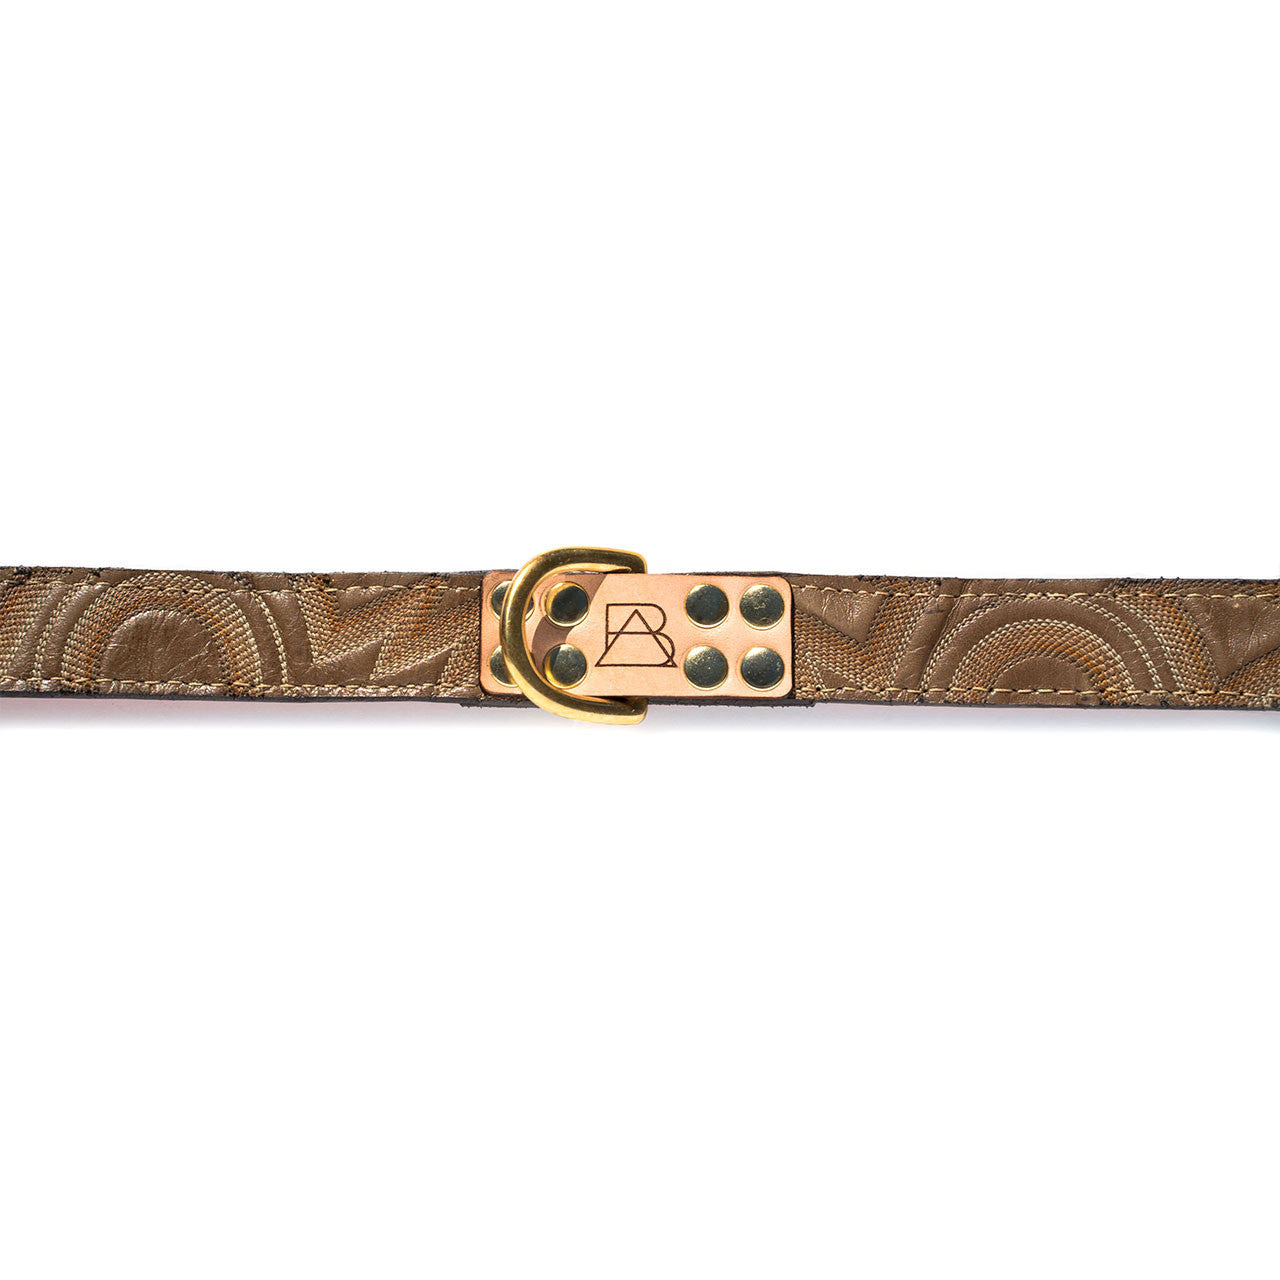 Orange Dog Collar with Light Brown Leather + Multicolor Tan Stitching